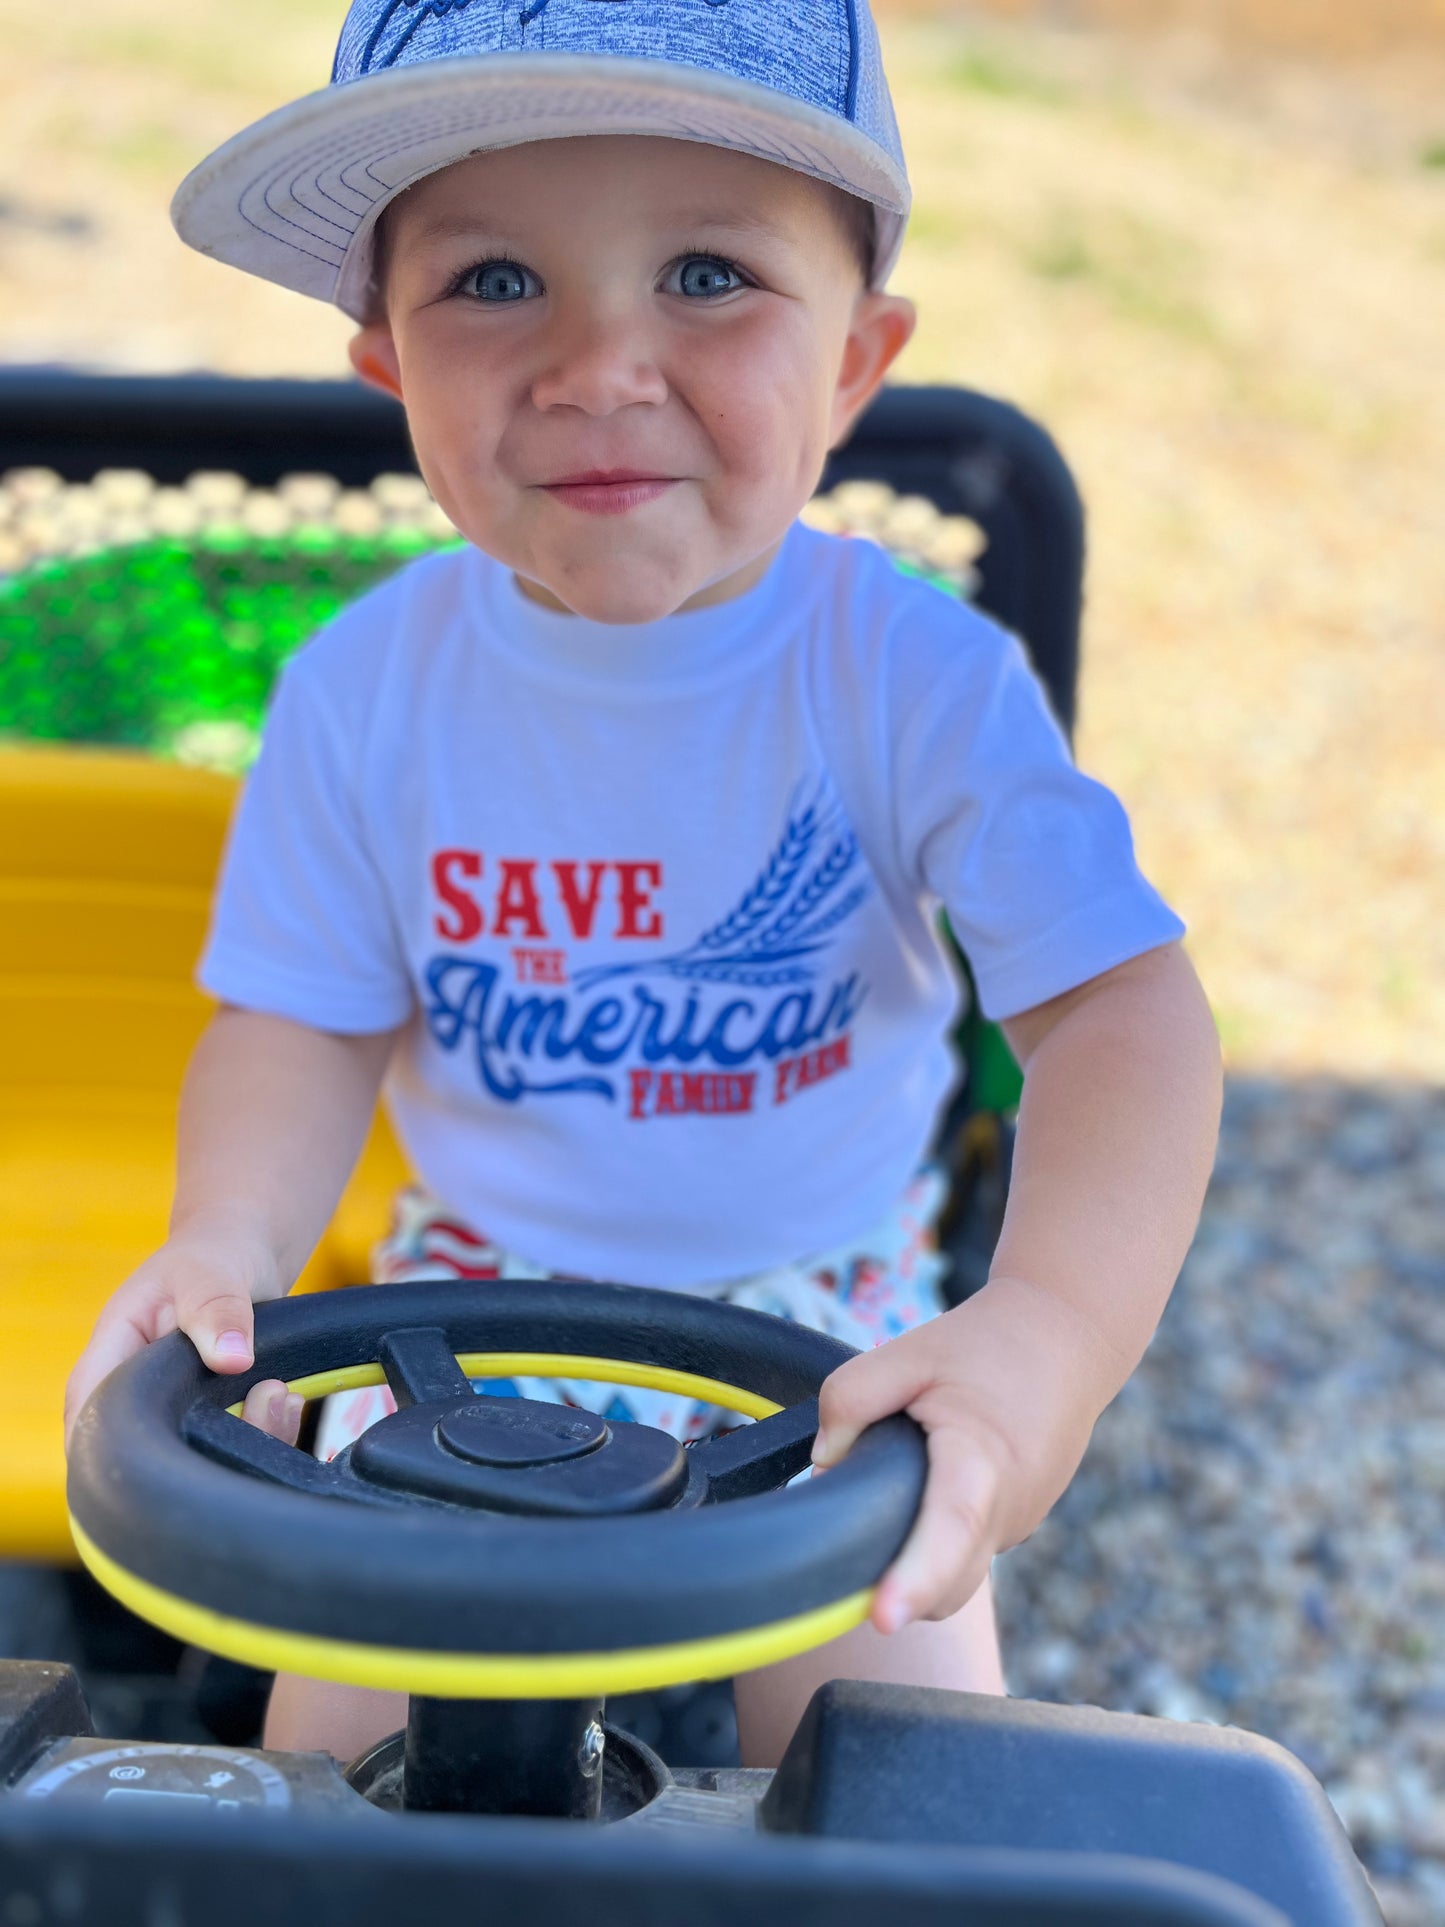 the Save the |American| Family Farm littles